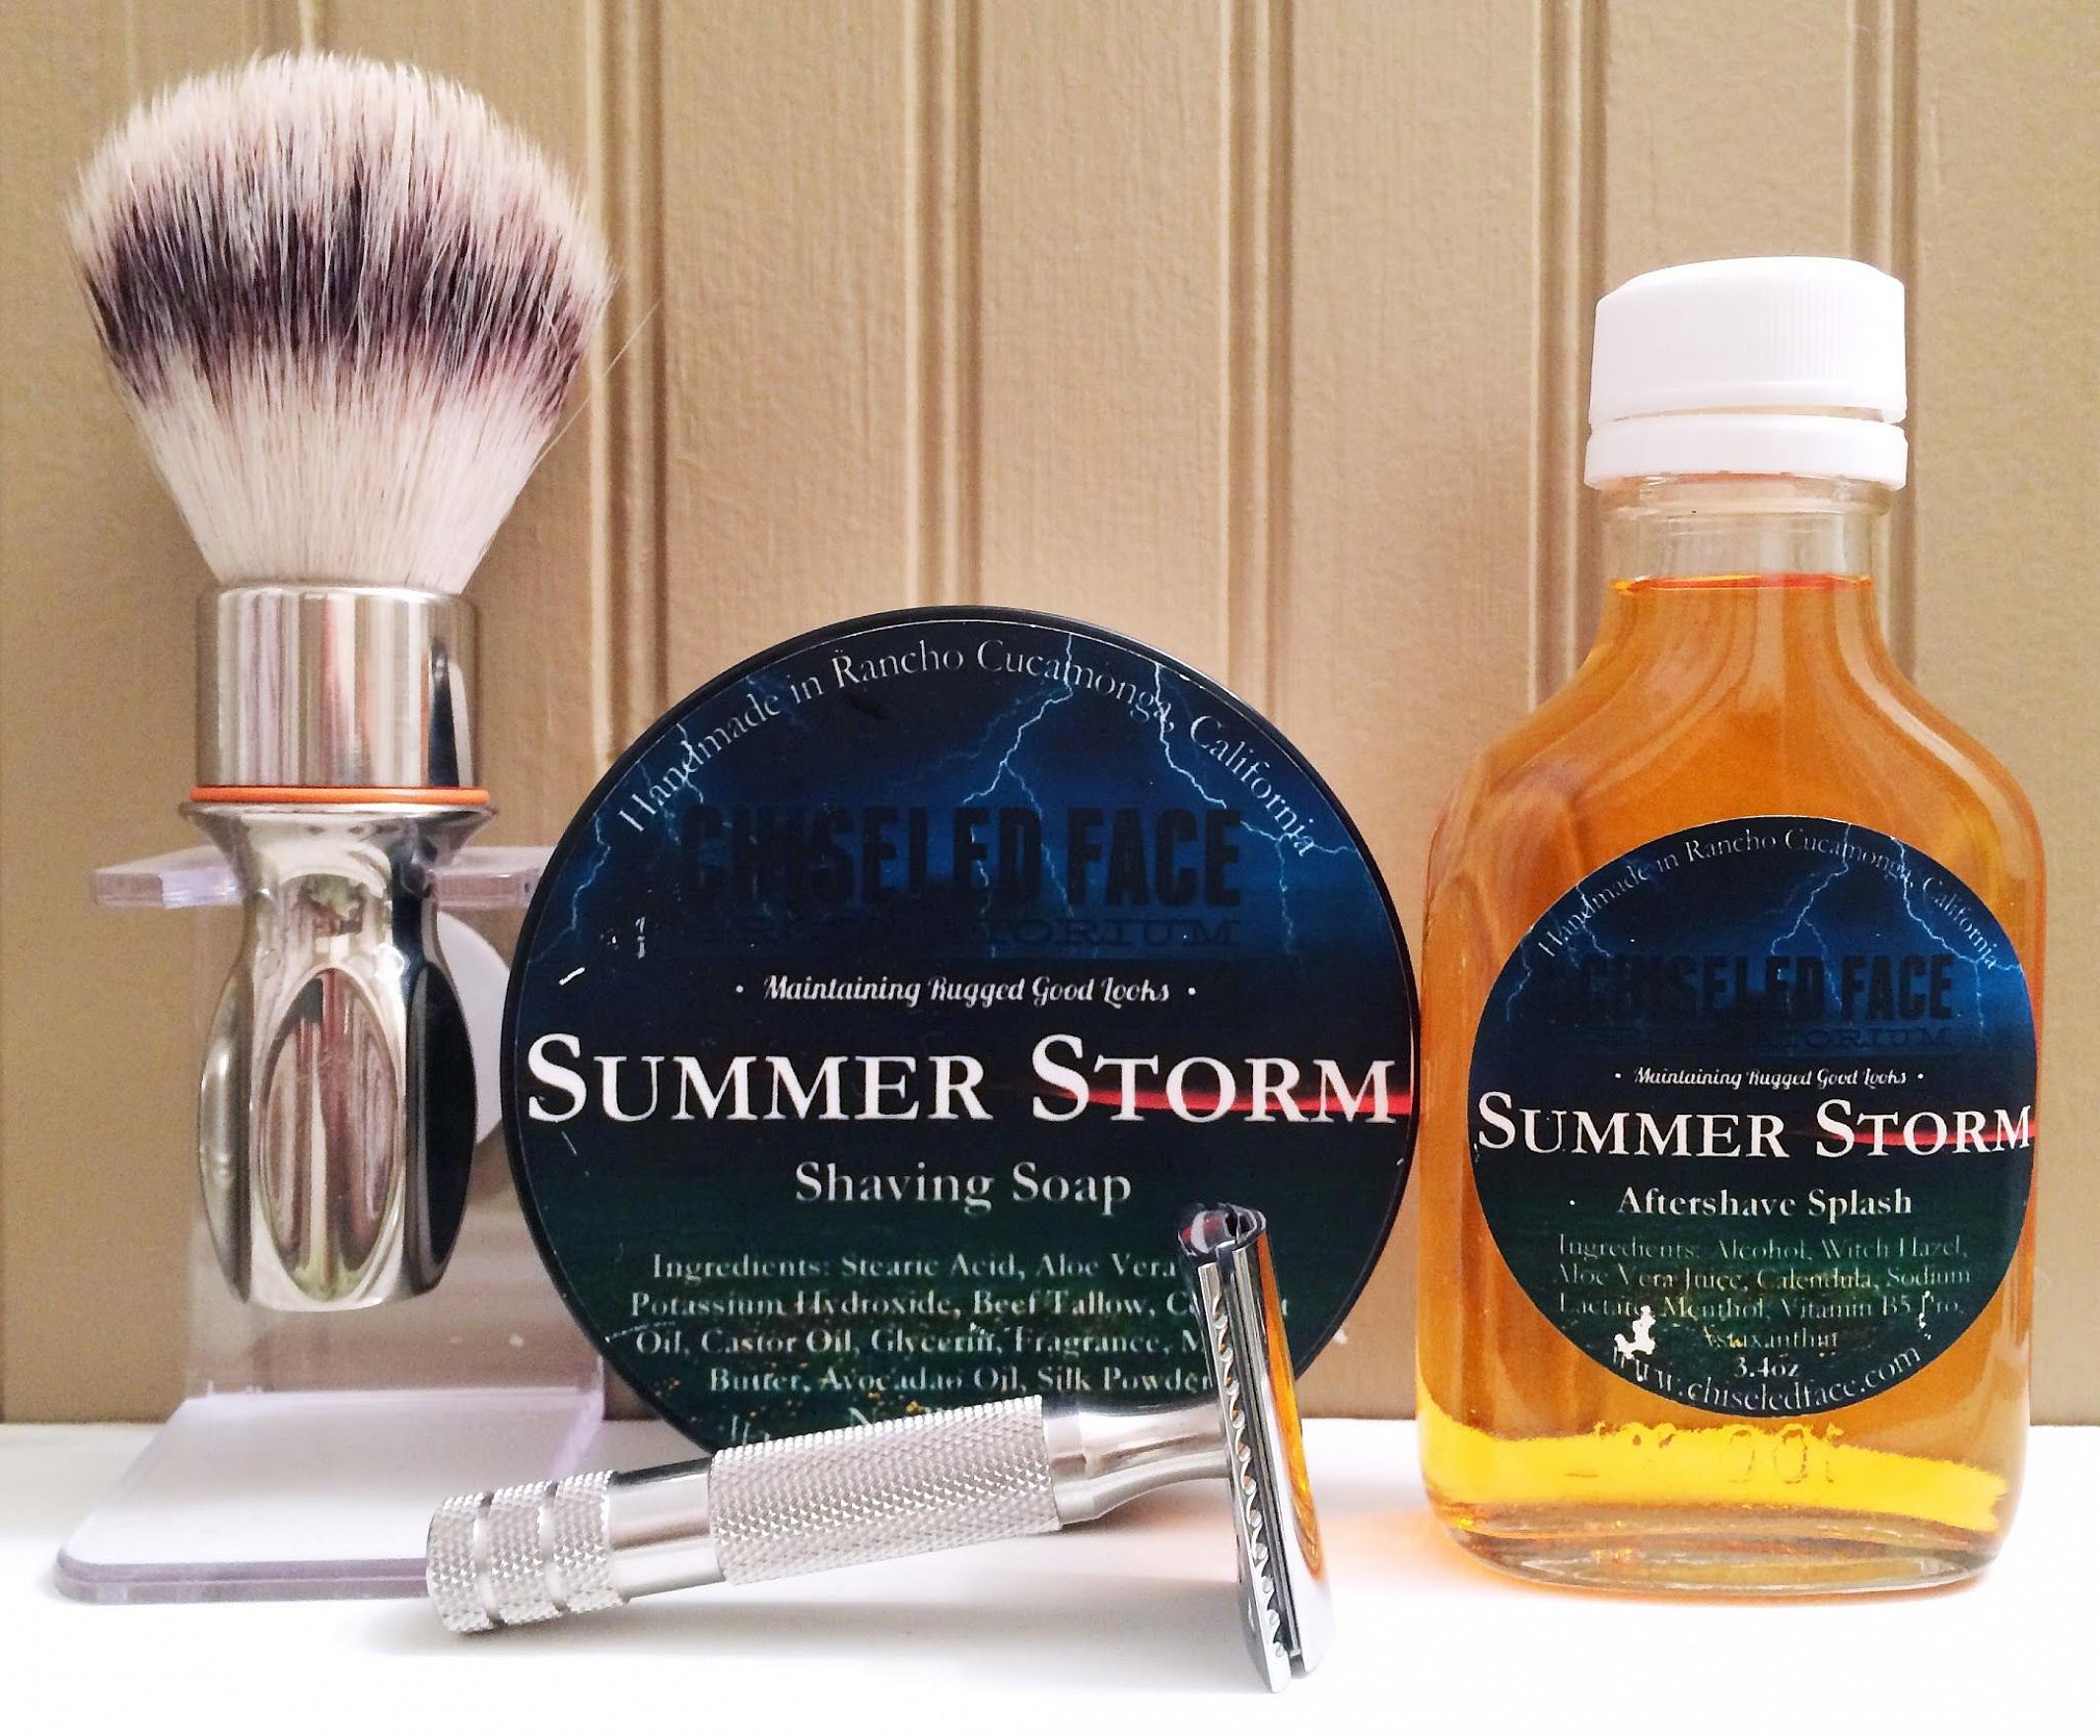 Chiseled Face "Summer Storm"